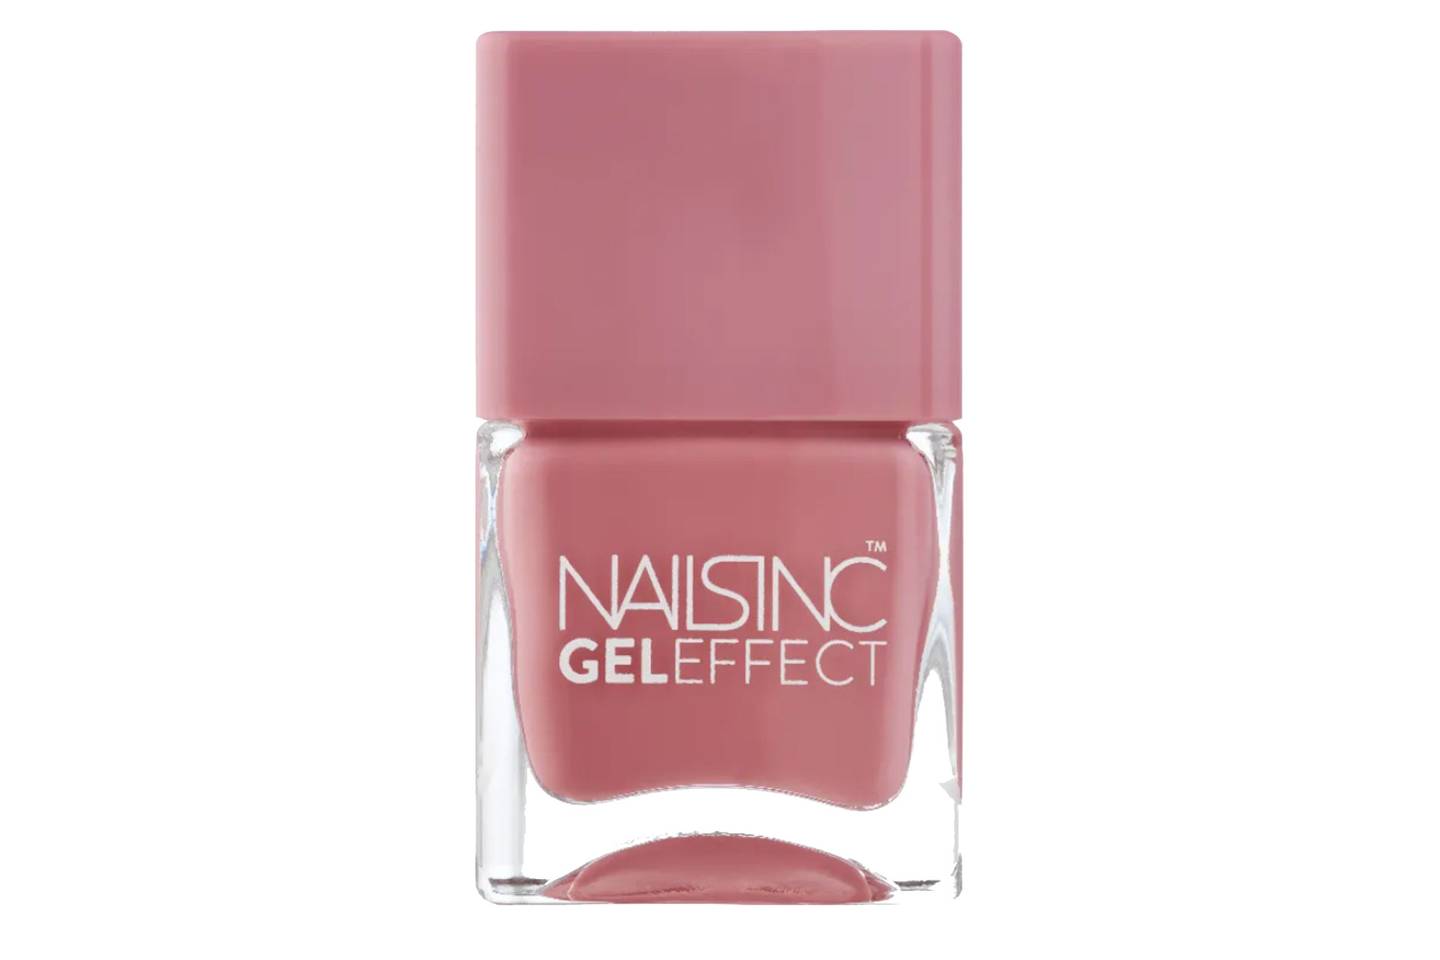 The Best Pink Polishes To Try According To Our Beauty Editor | Glamour UK